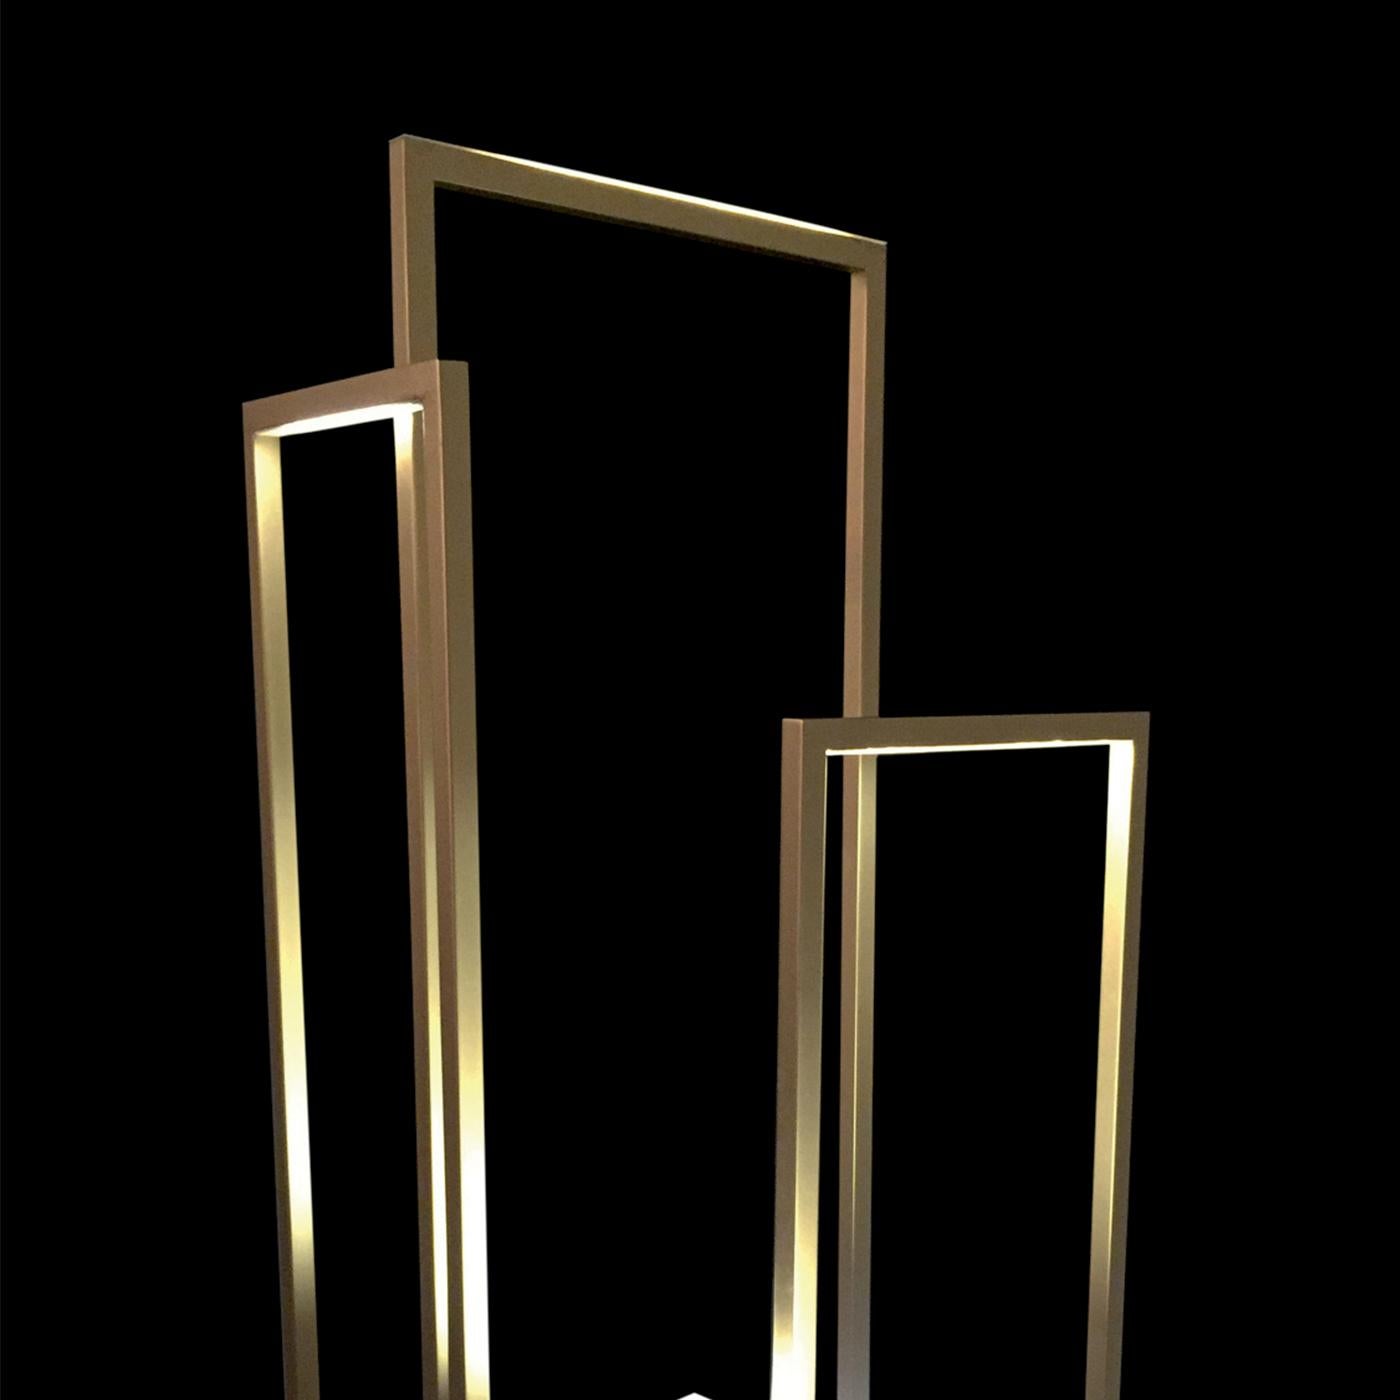 This modern floor lamp is made of several bars in gold finish iron with a square section that cross at different heights, creating a series of rectangles positioned in different directions. LED lights run around the inner perimeter of the bars